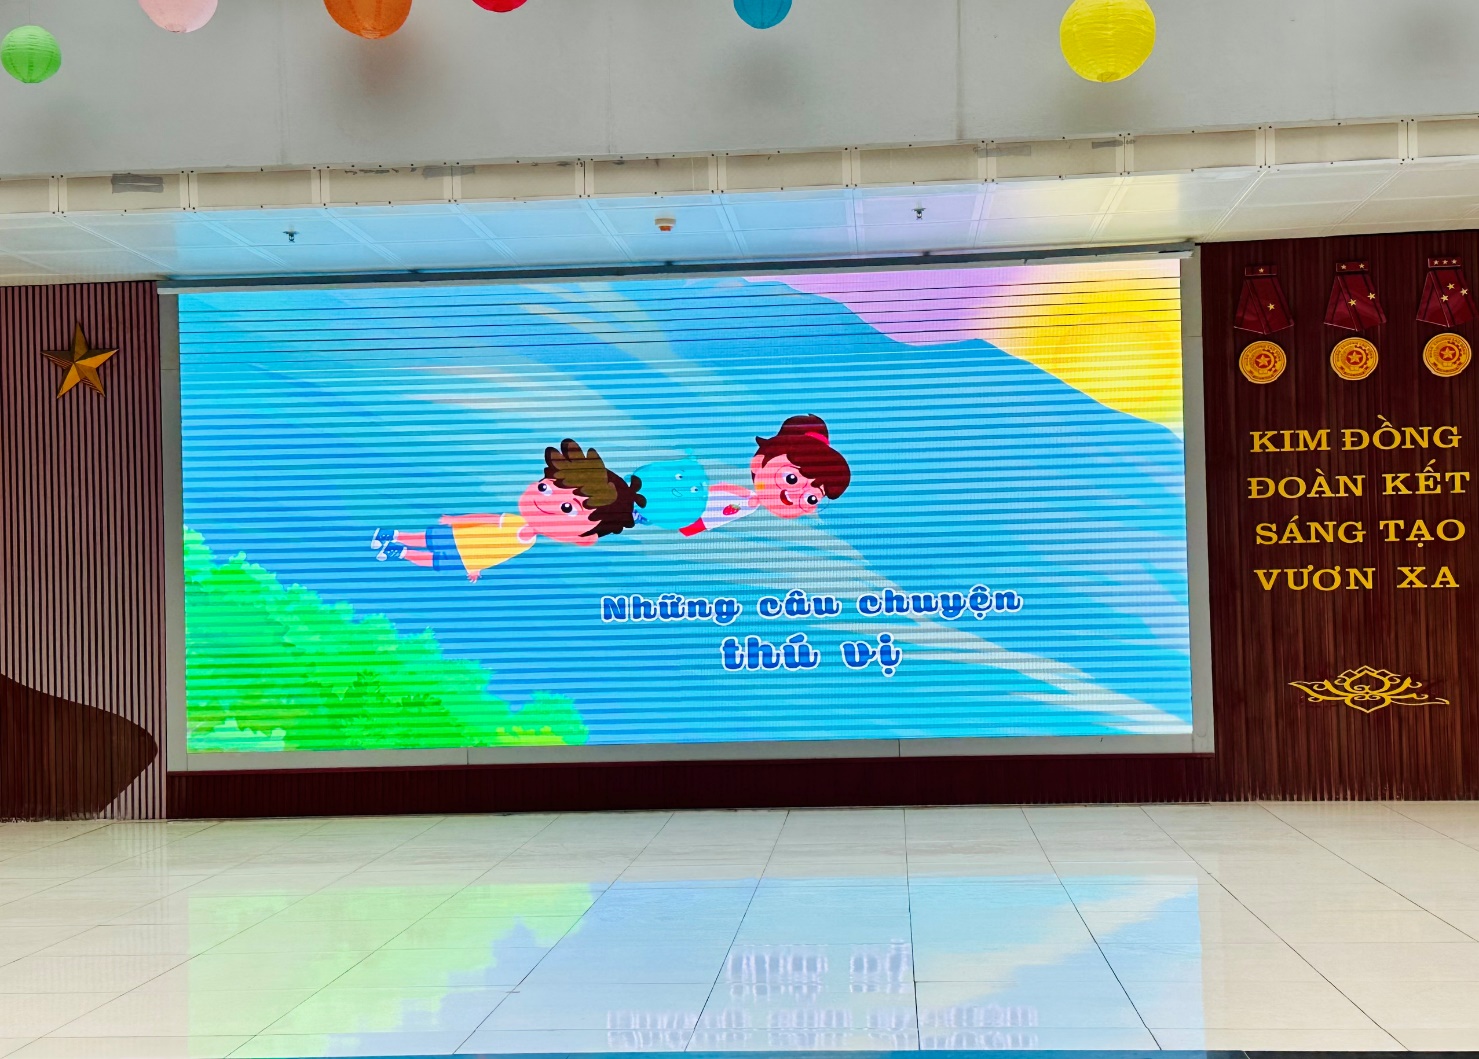 A large screen with cartoon characters on it

Description automatically generated